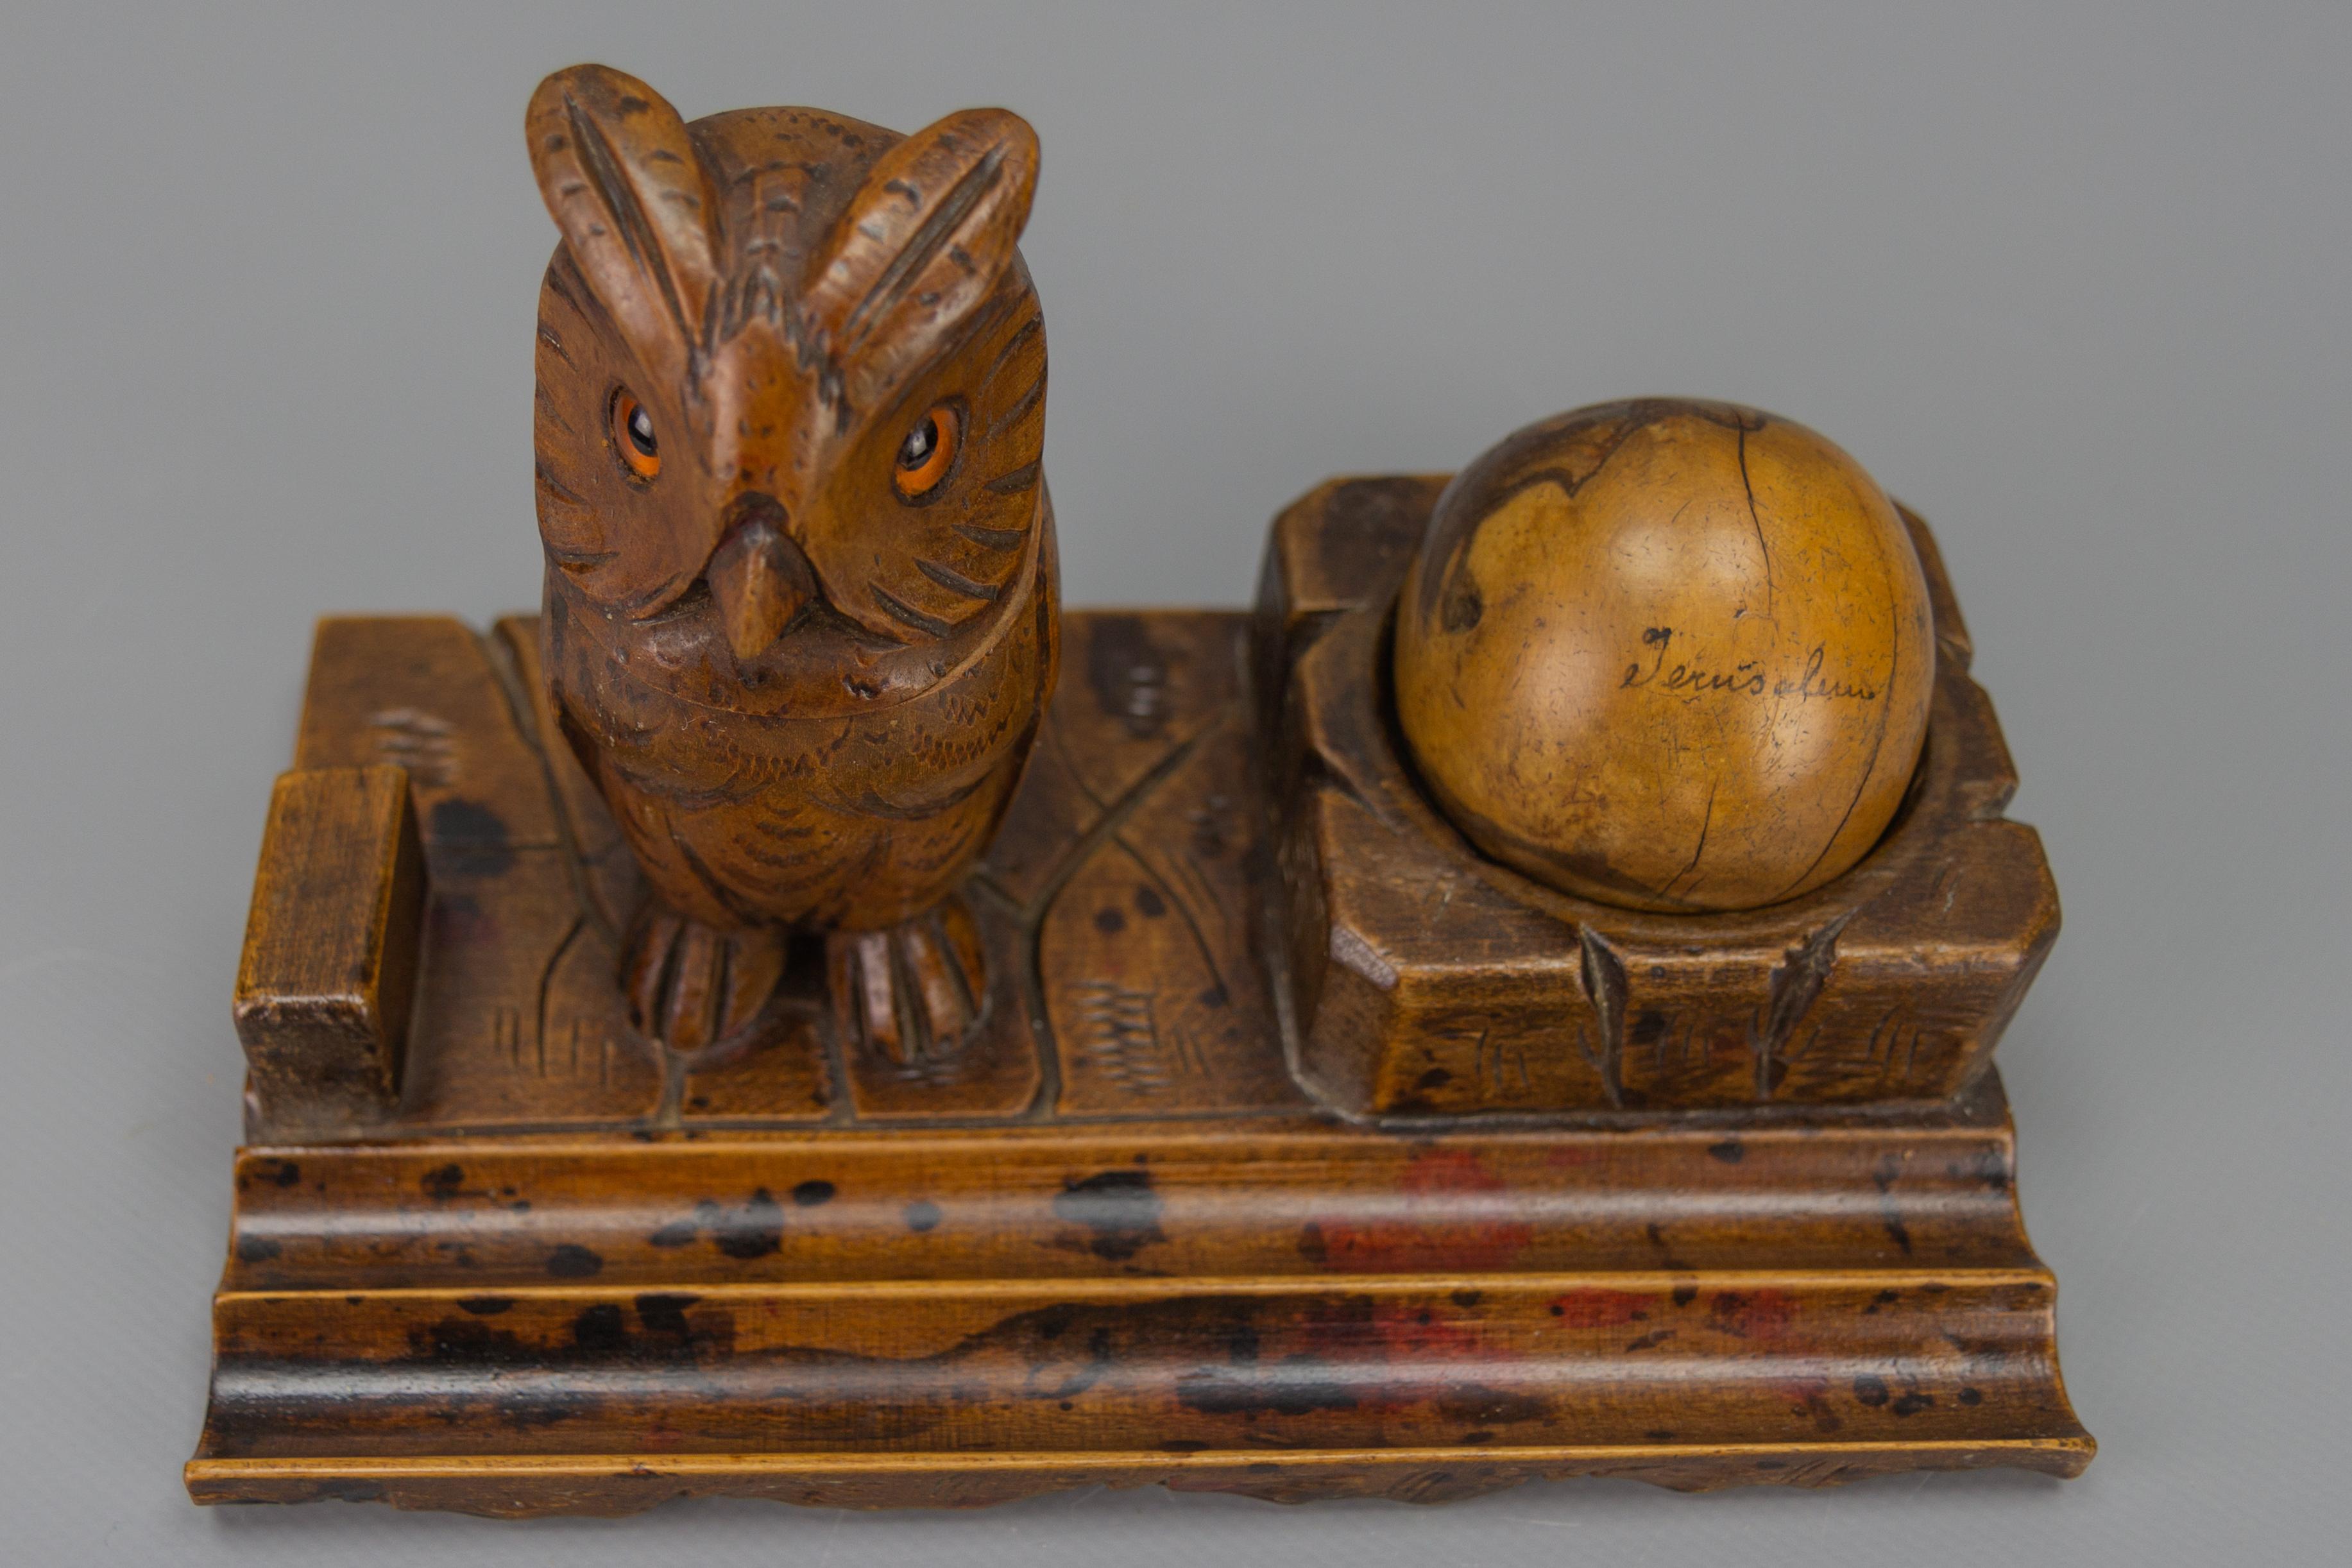 Hand-Carved Wooden Inkwell or Pen Stand with Owl Figure, 1920s For Sale 1